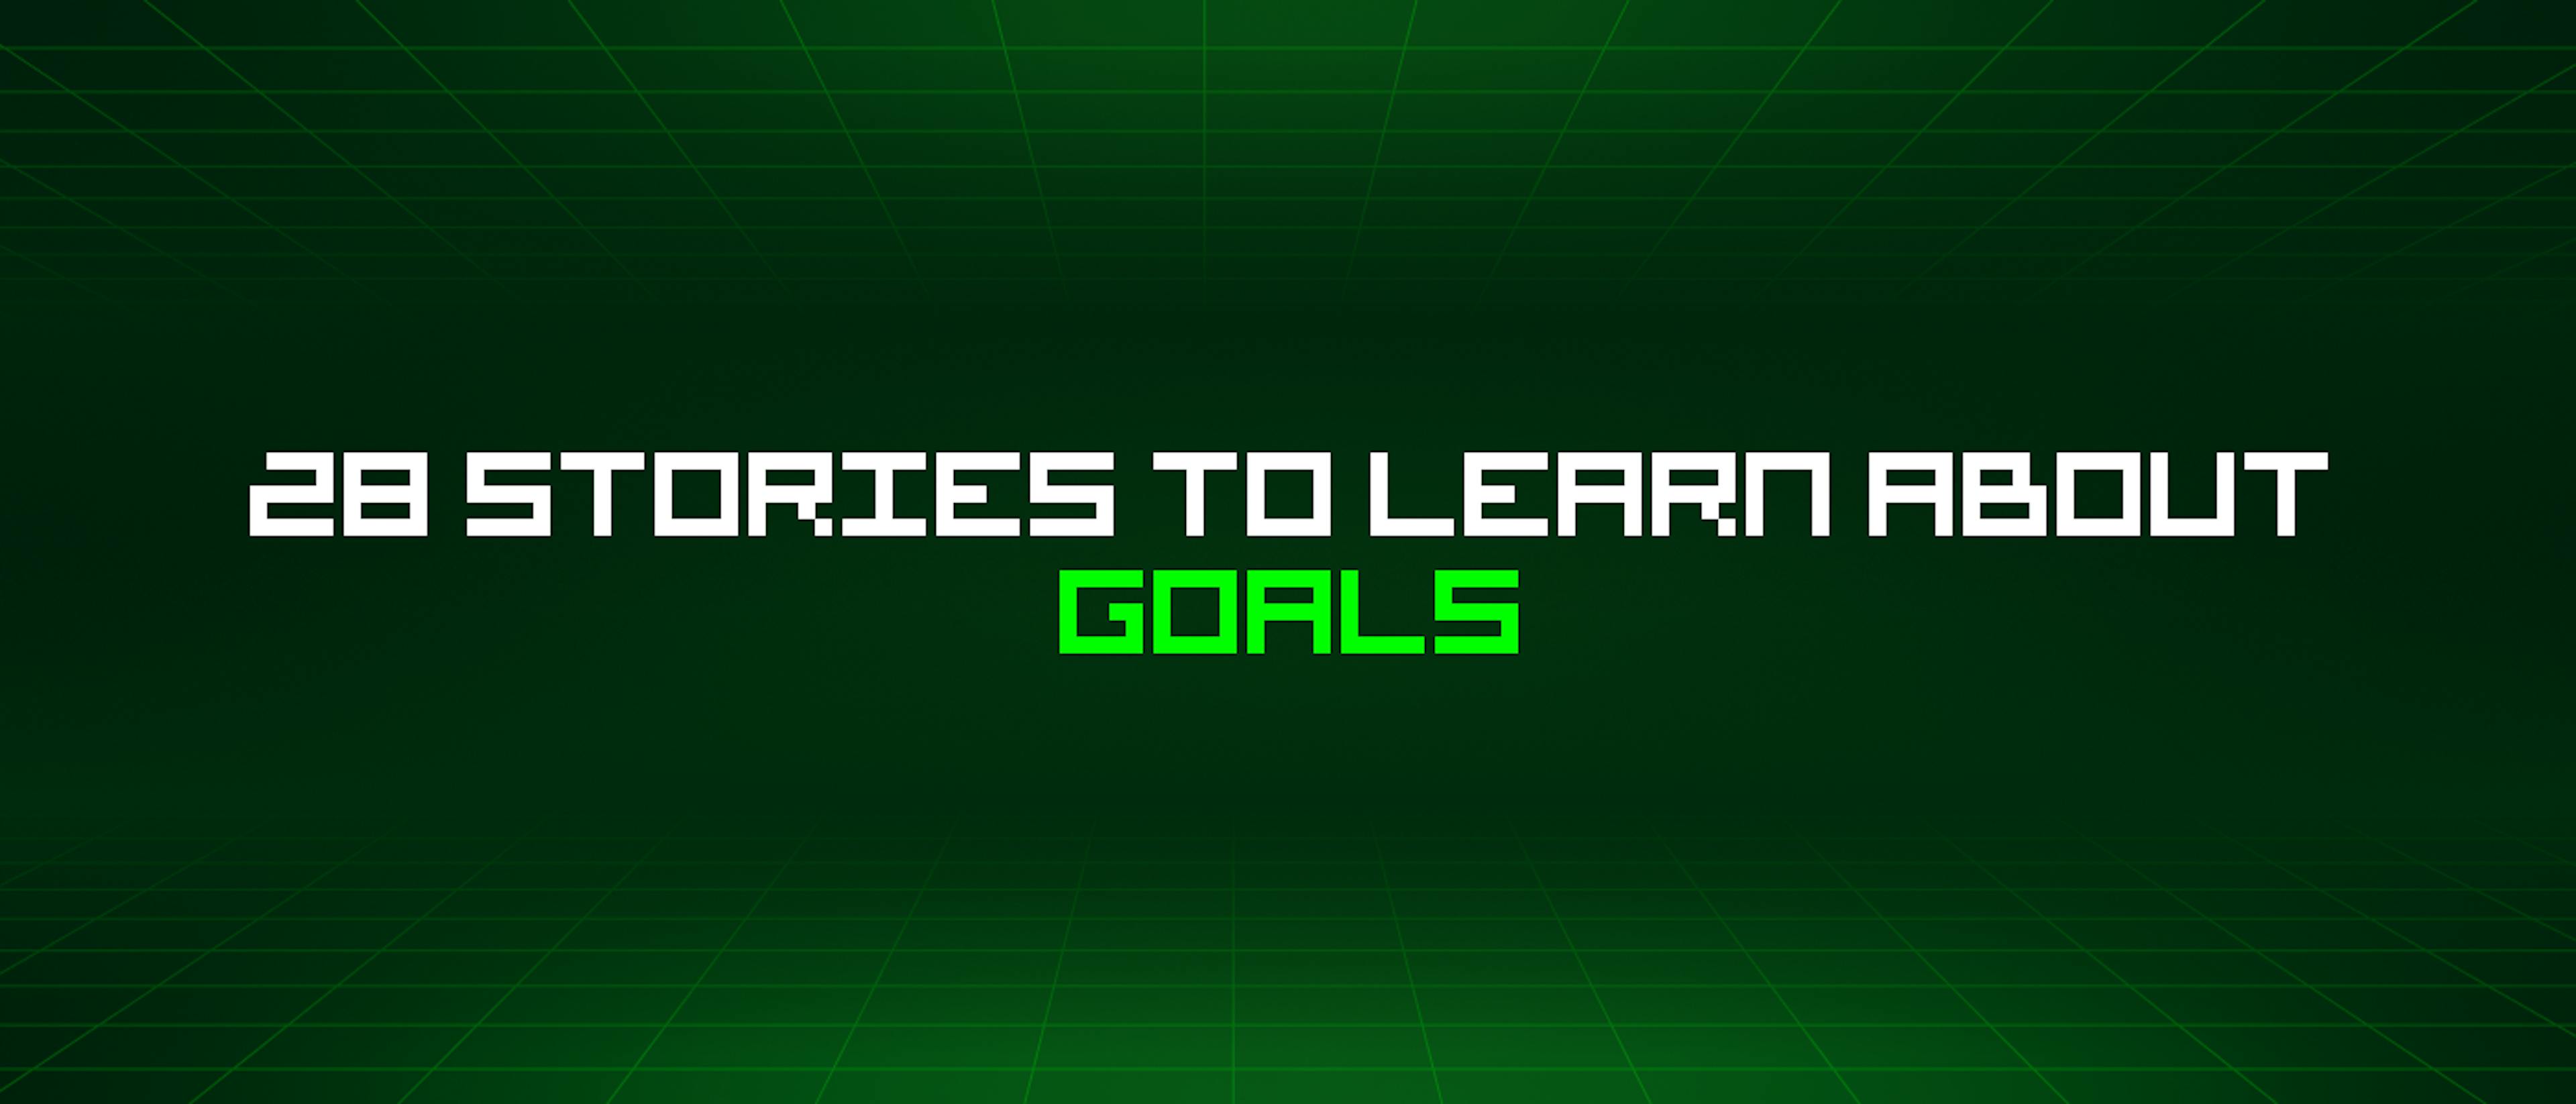 featured image - 28 Stories To Learn About Goals